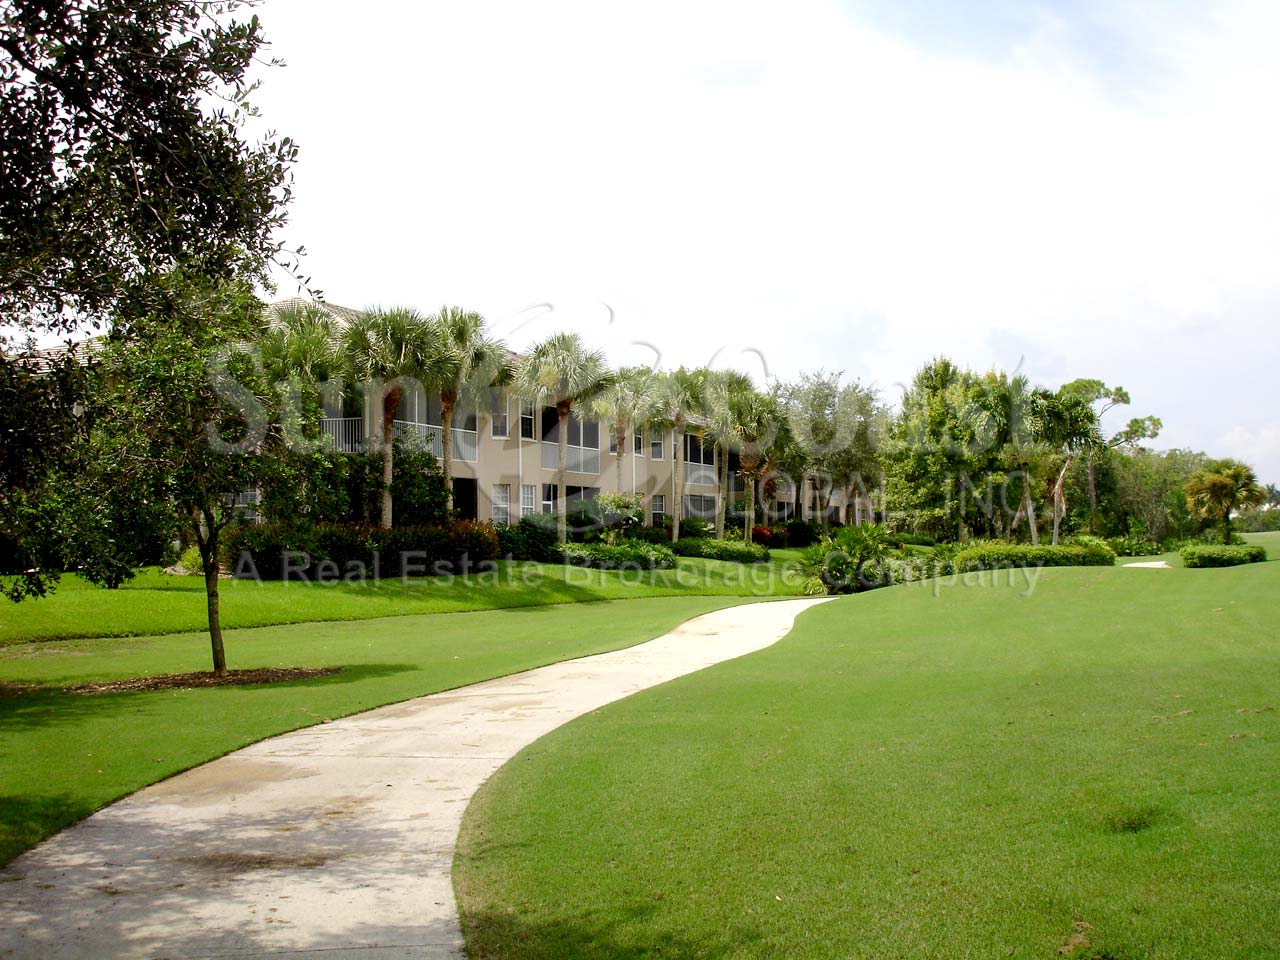 Marina Cove is a non gated community within the gated community of Windstar